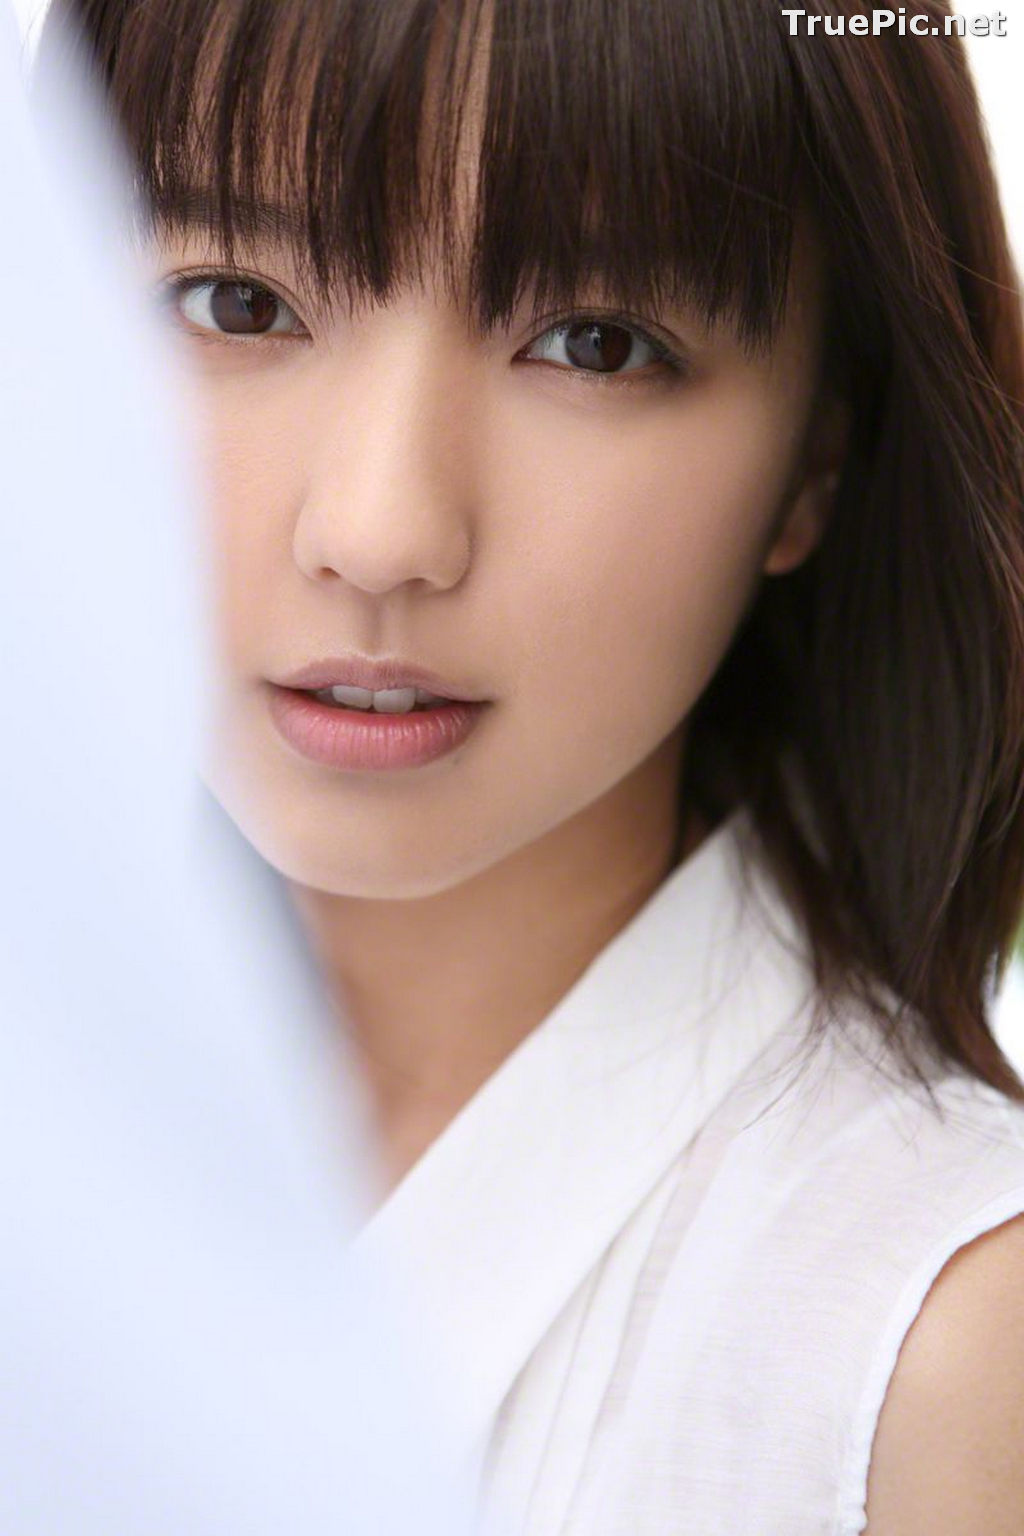 Image [WBGC Photograph] No.131 - Japanese Singer and Actress - Erina Mano - TruePic.net - Picture-24